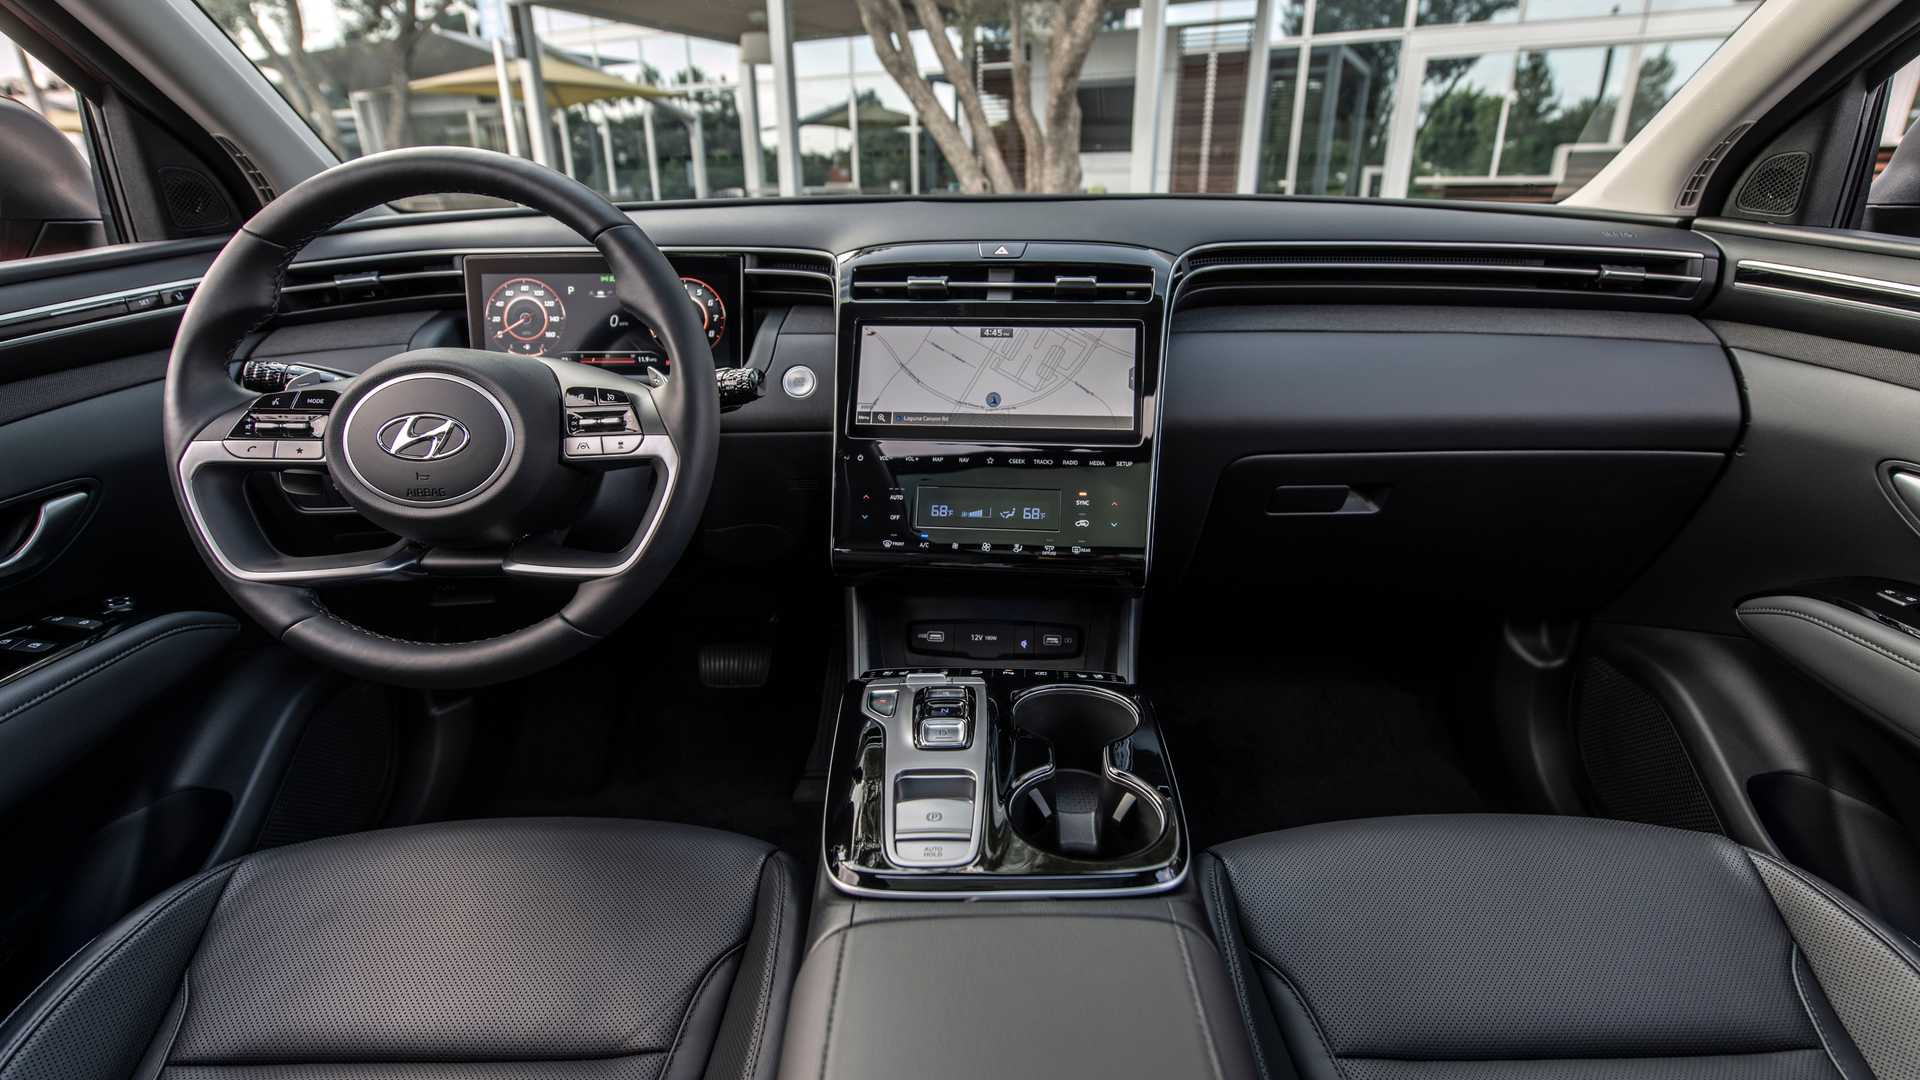 They say these are the 10 best interiors of 2021